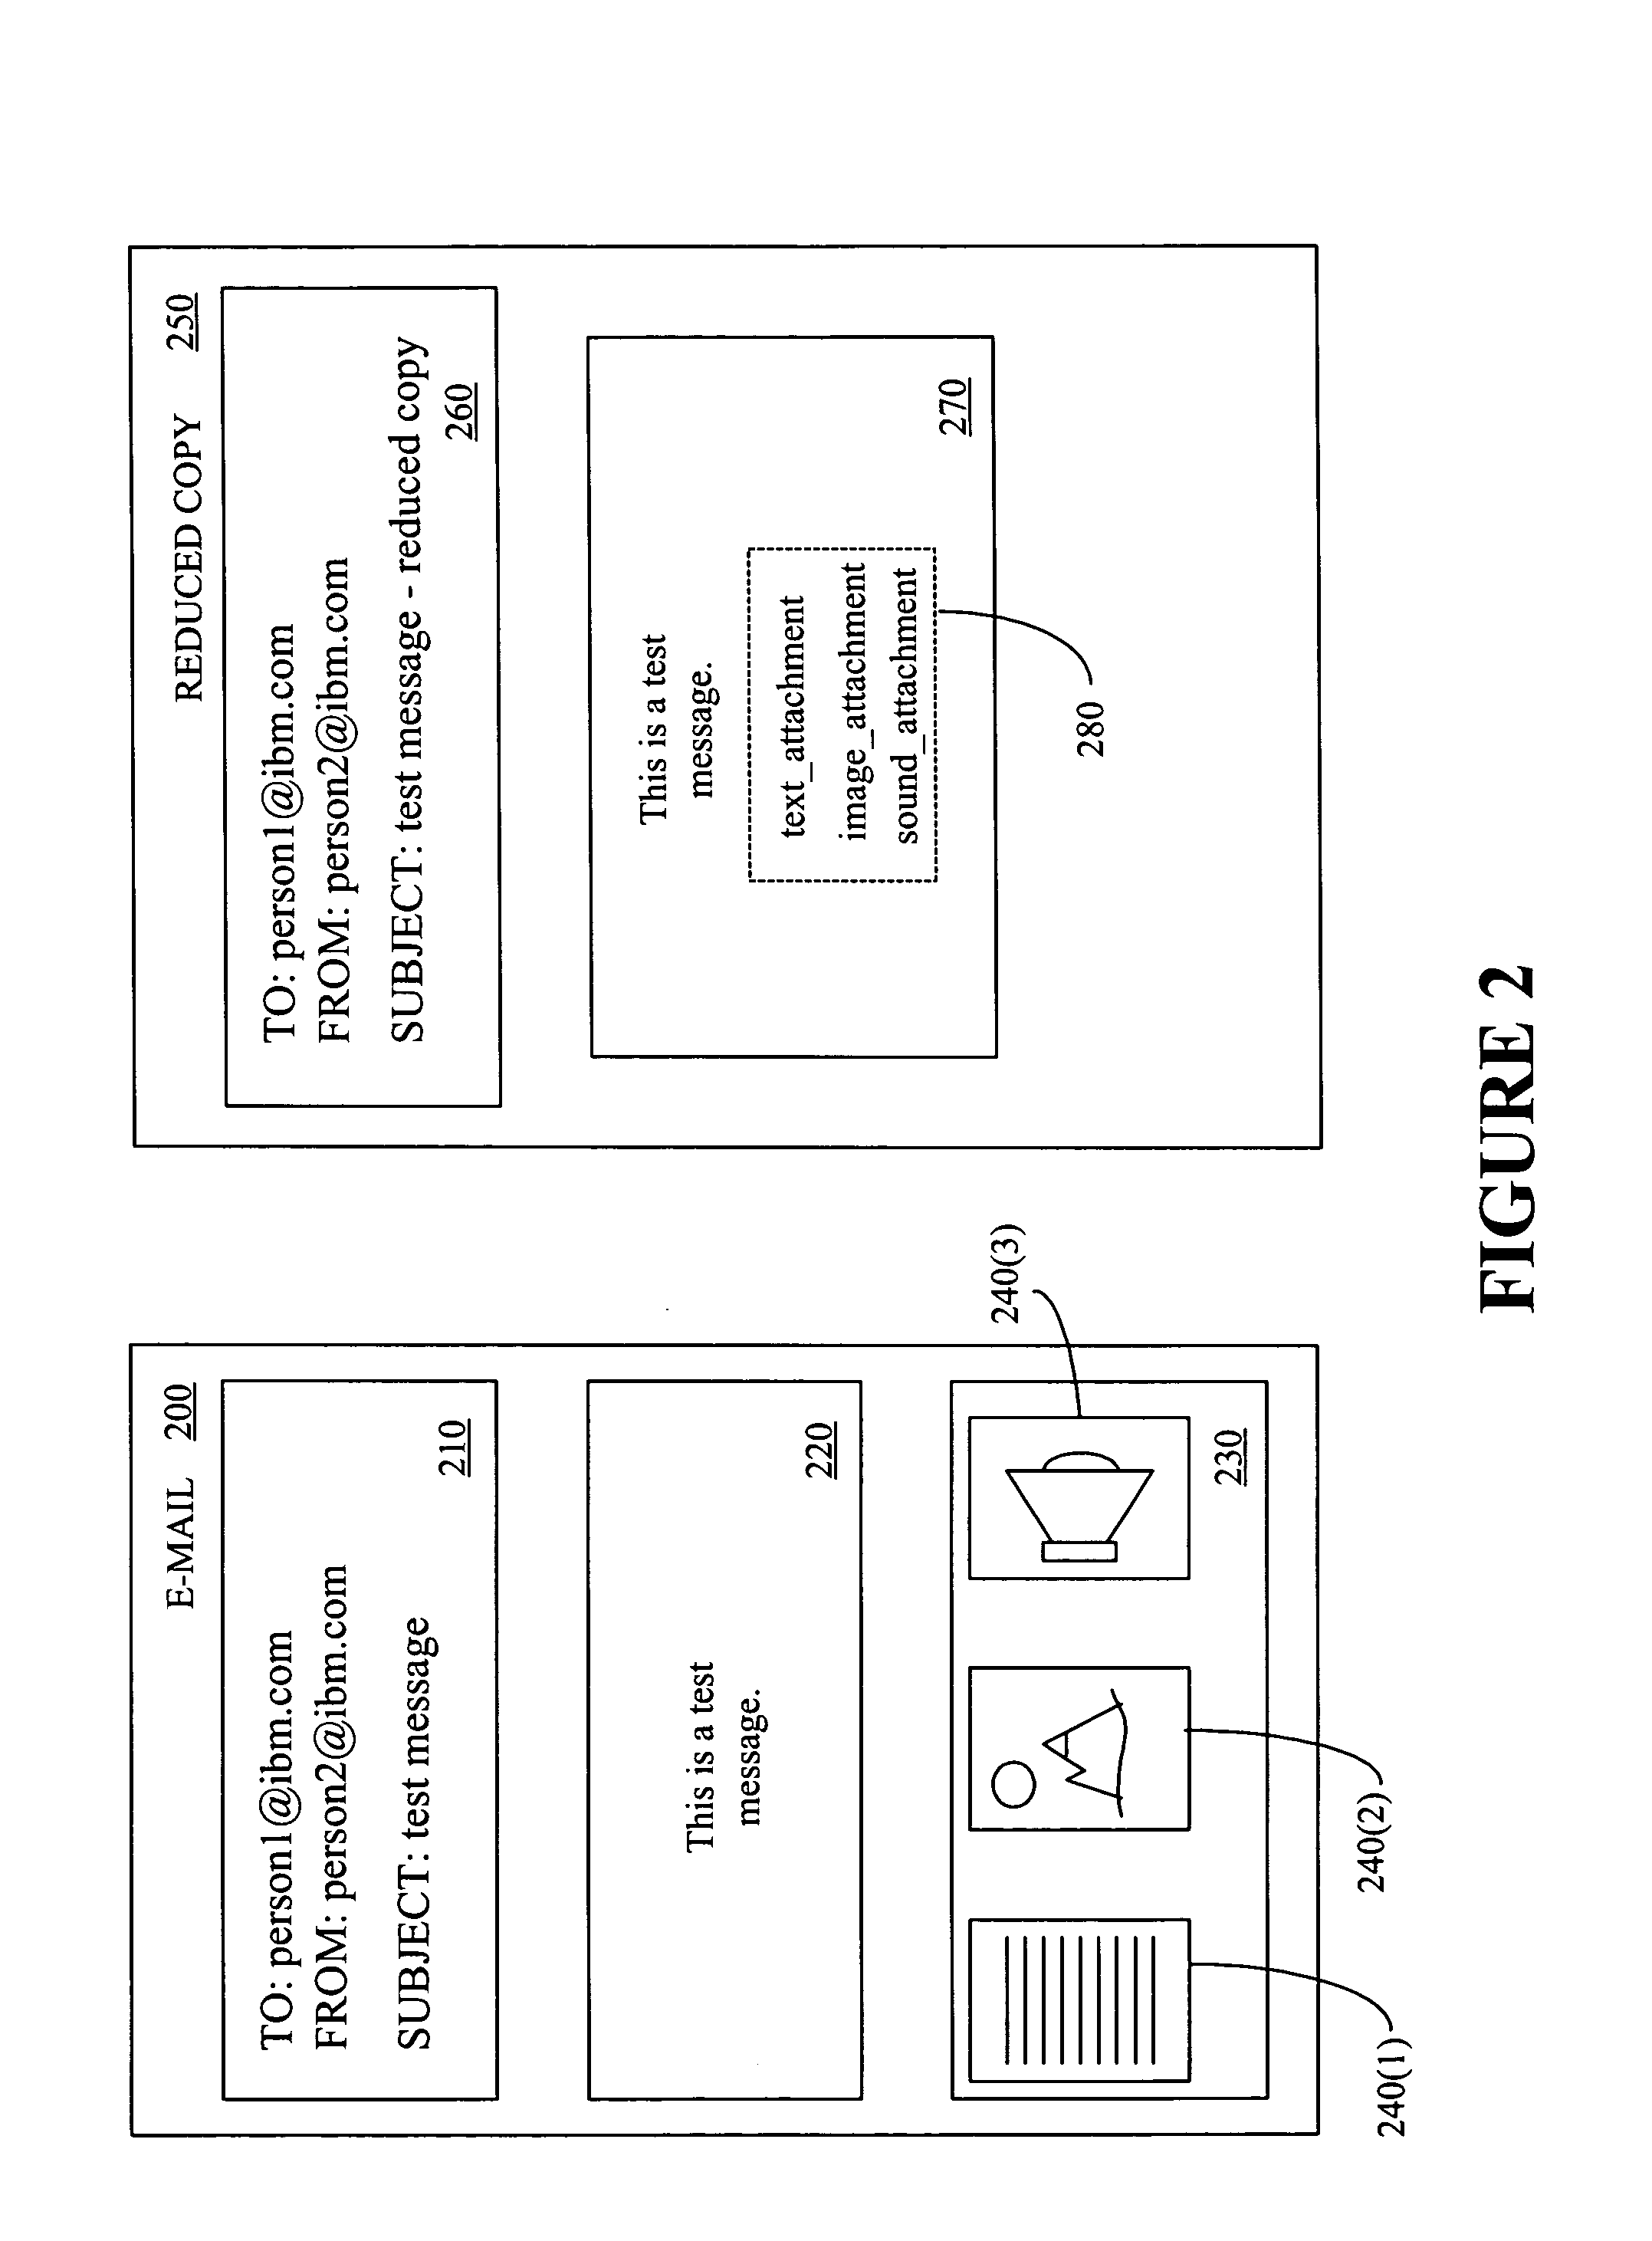 Providing a portion of an electronic mail message based upon a transfer rate and a message size